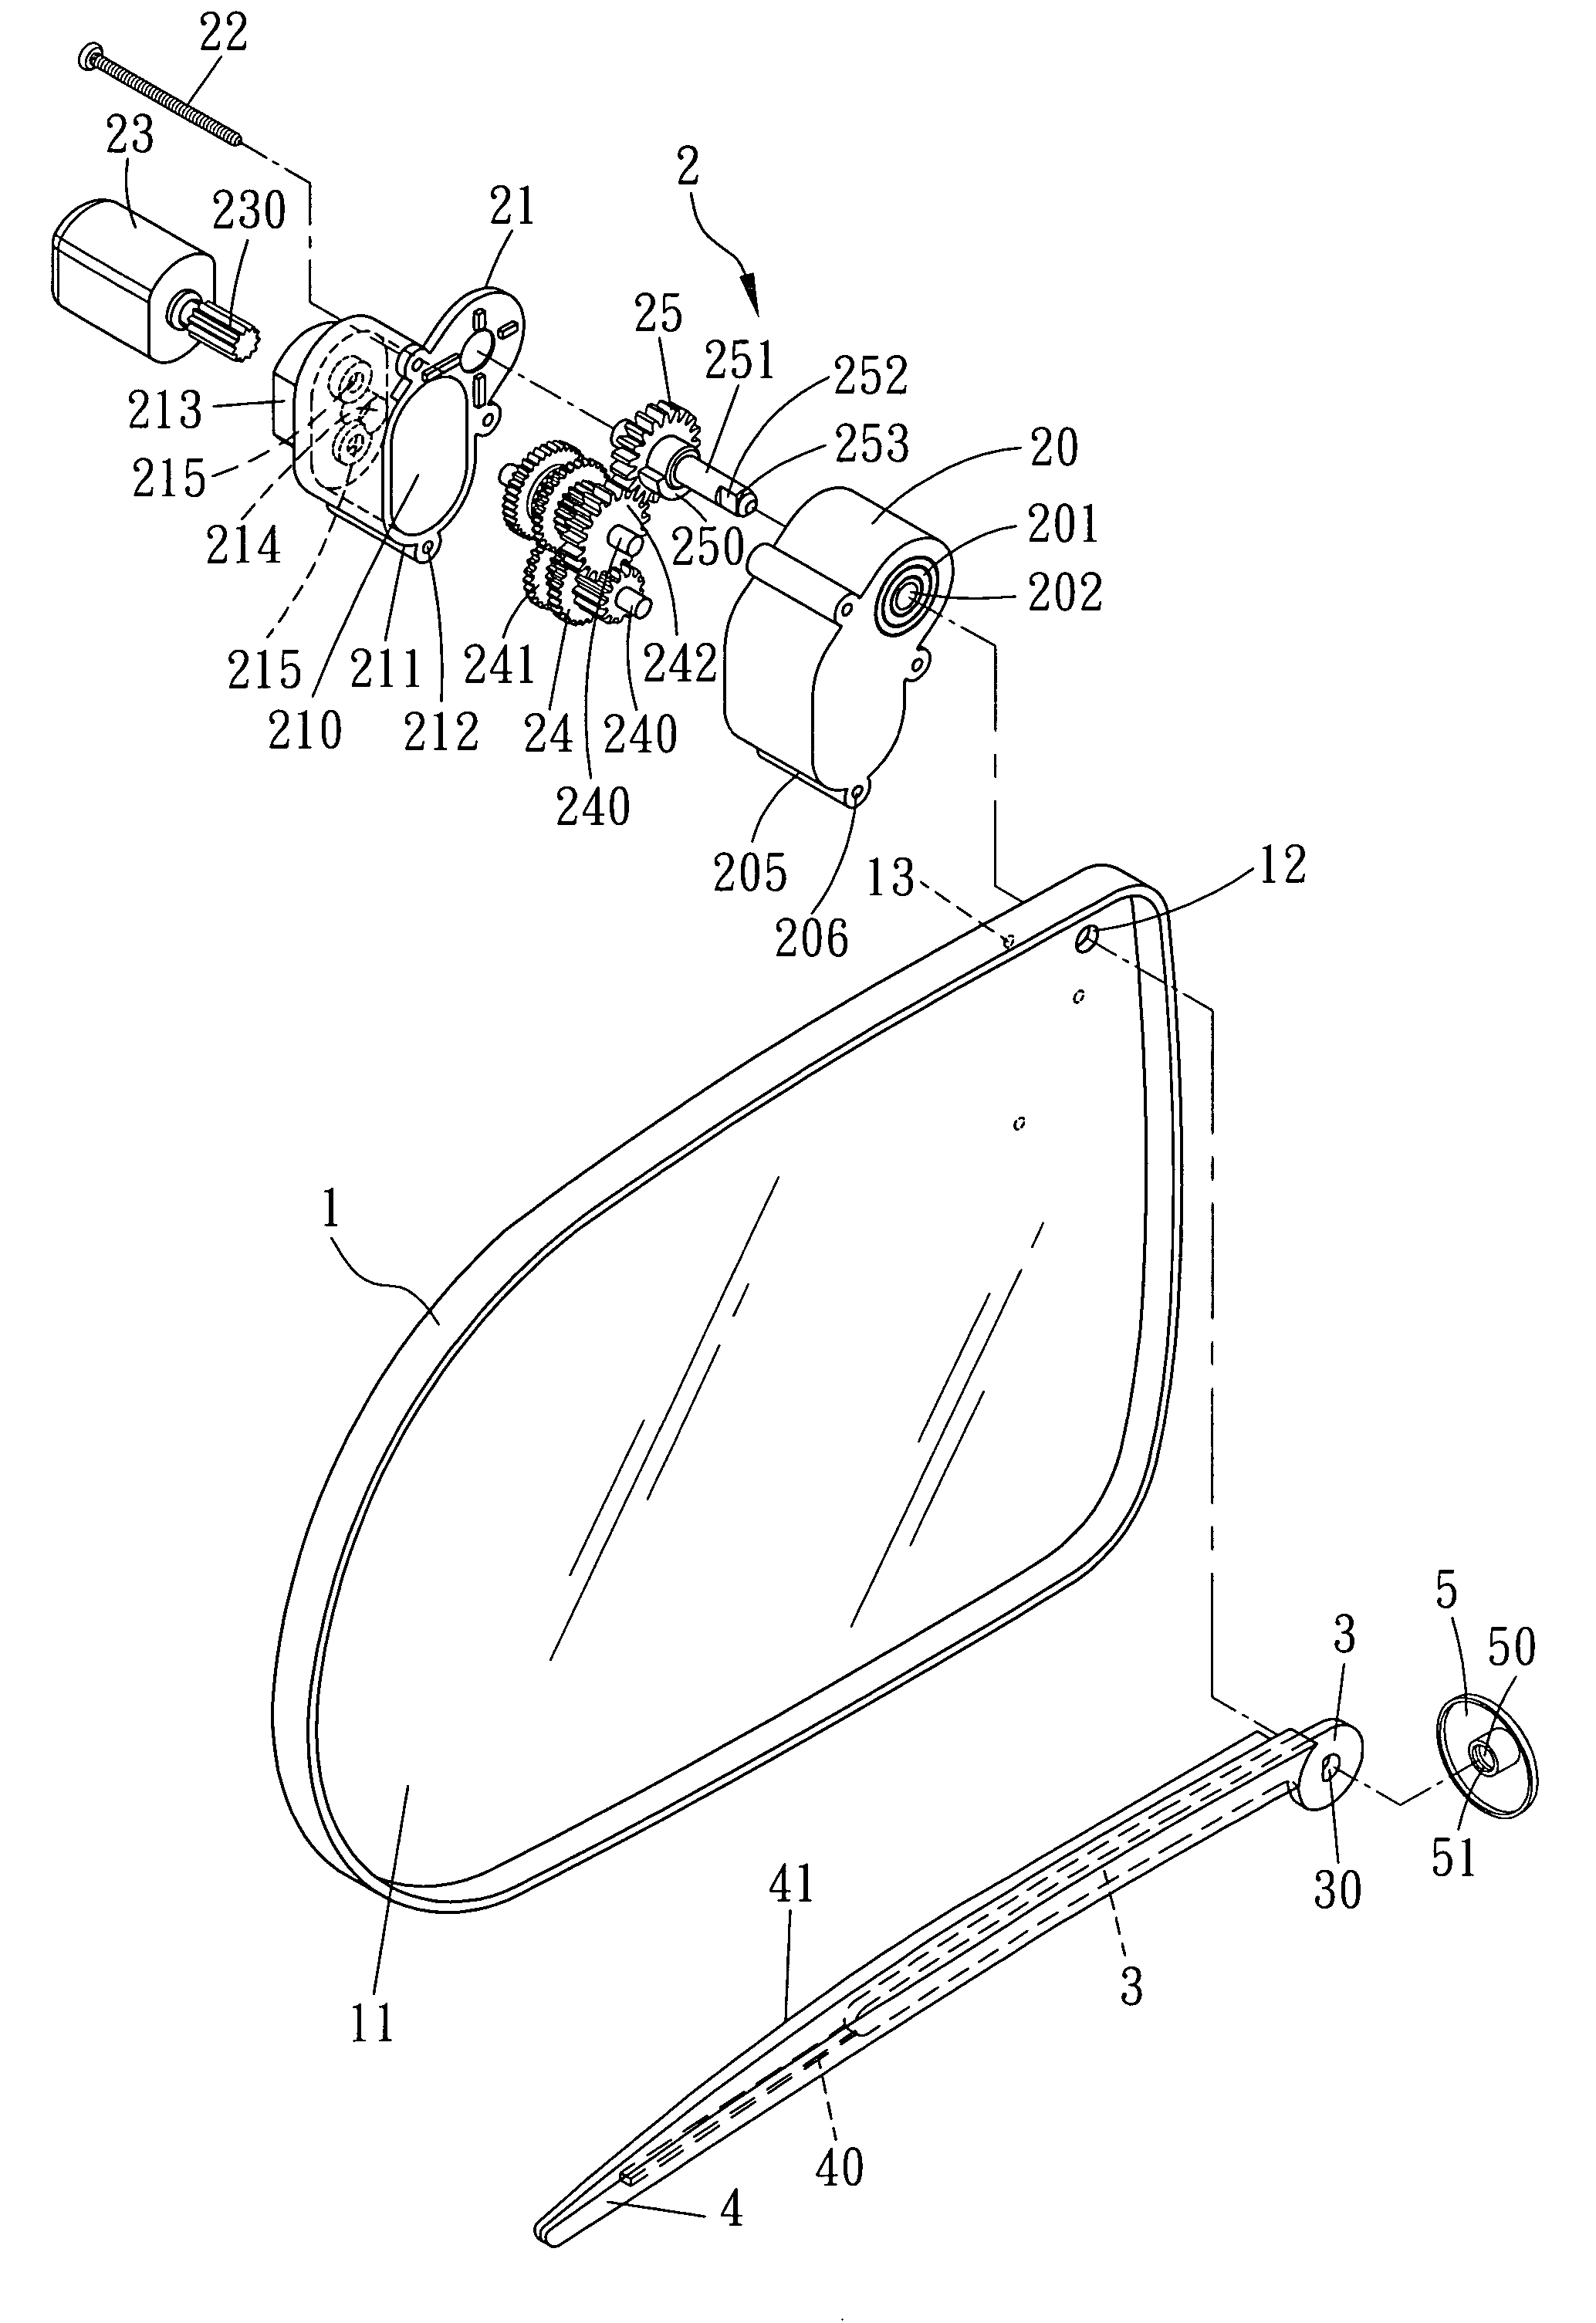 Wiper for an automobile rear-view mirror